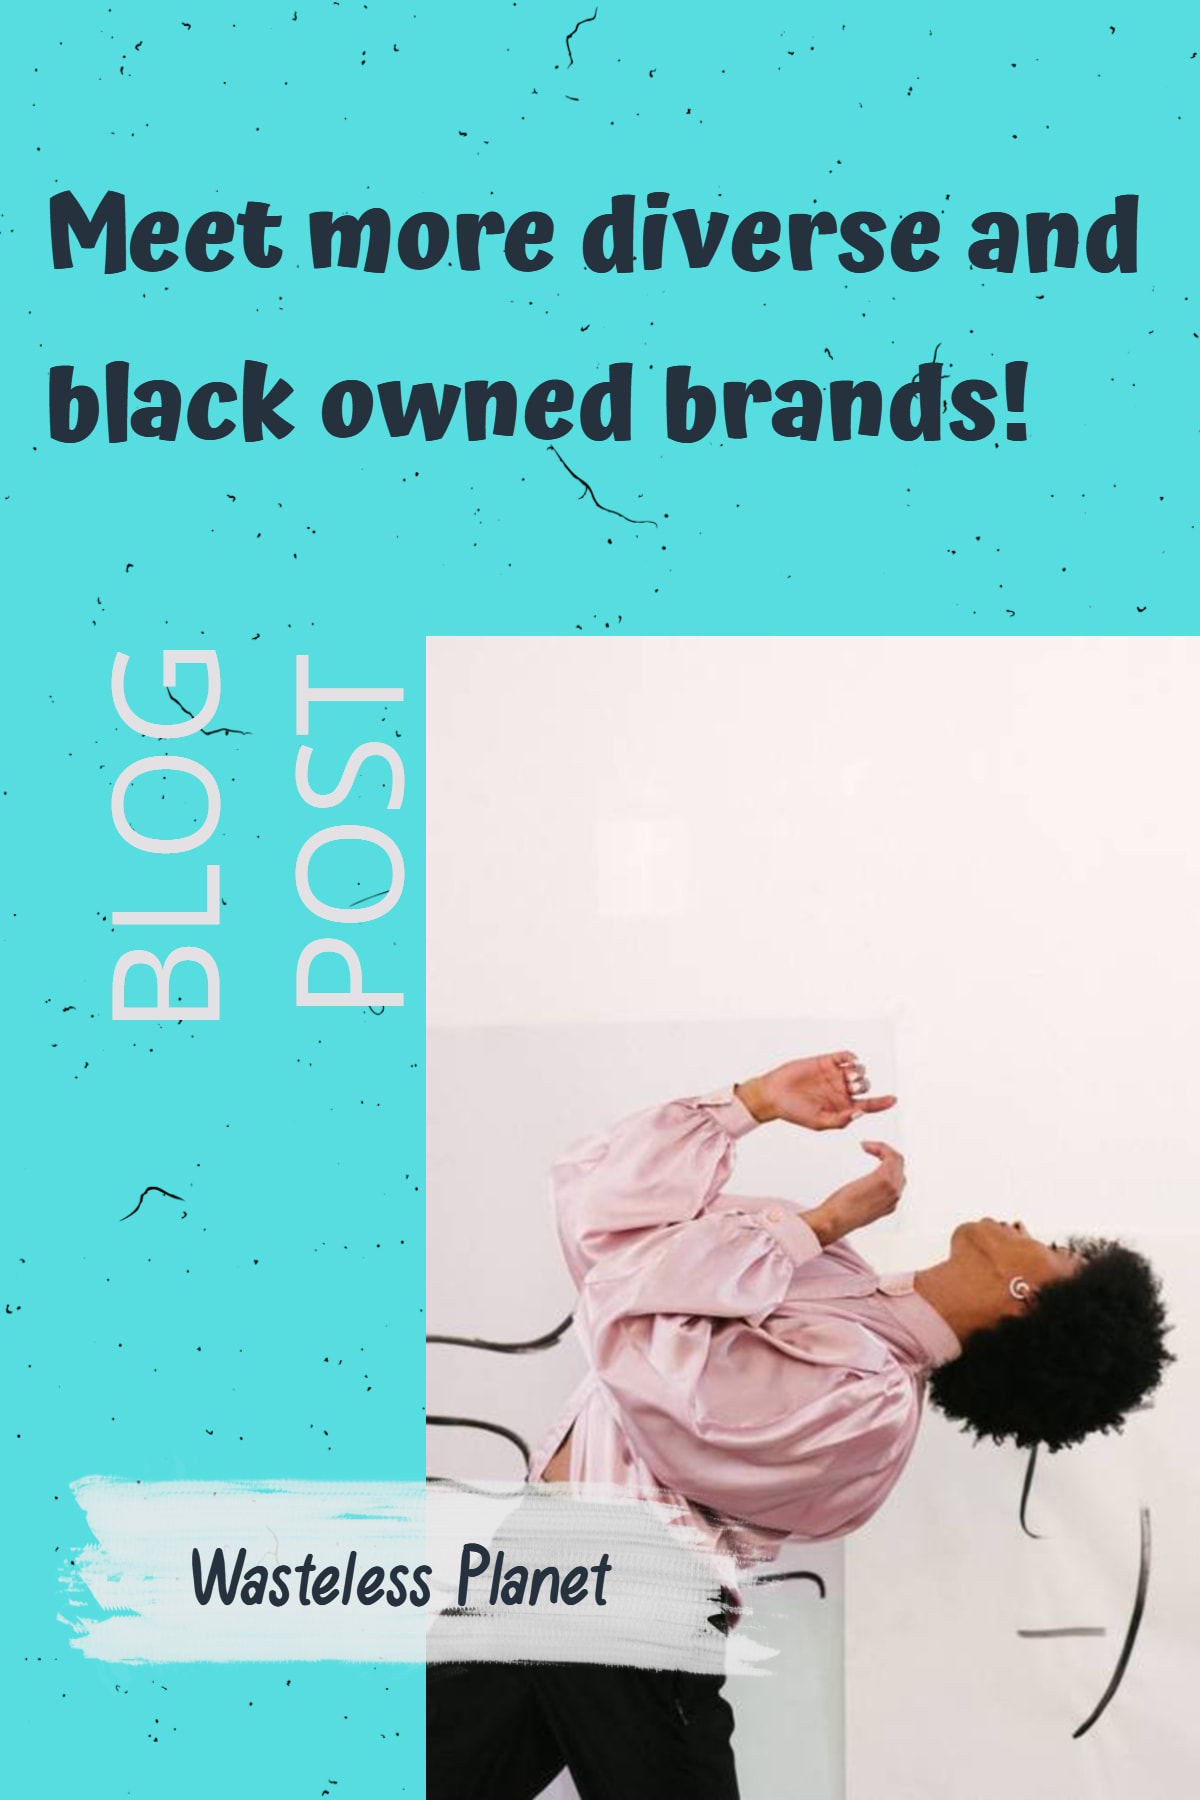 Meet more diverse and black owned brands!